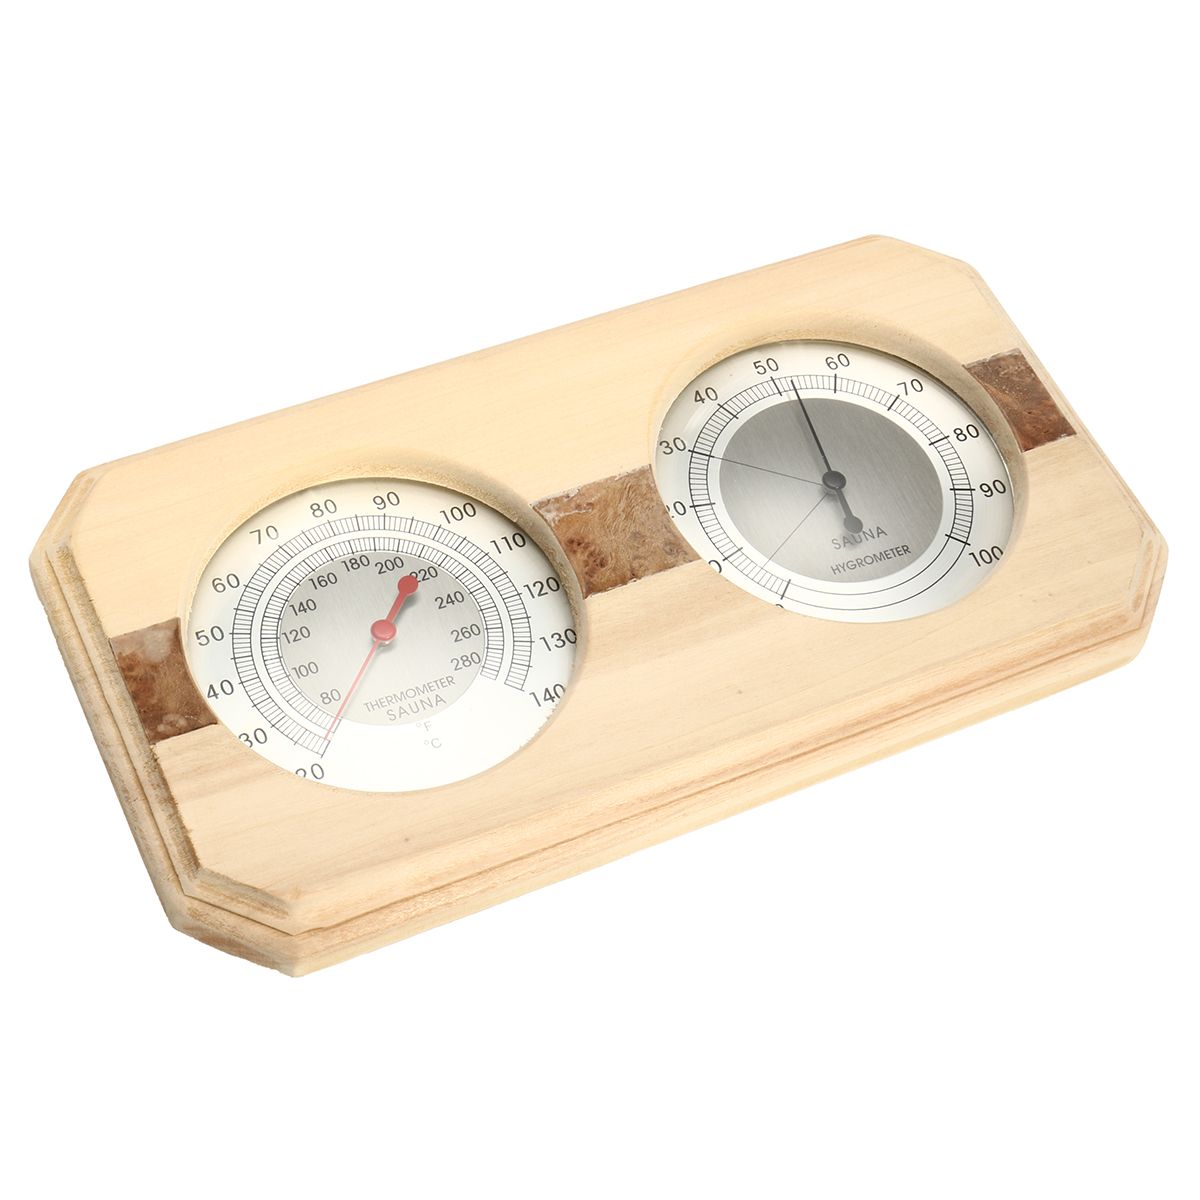 Wooden-Sauna-Hygrothermograph-Thermometer-Hygrometer-Sauna-Room-Accessory-1286064